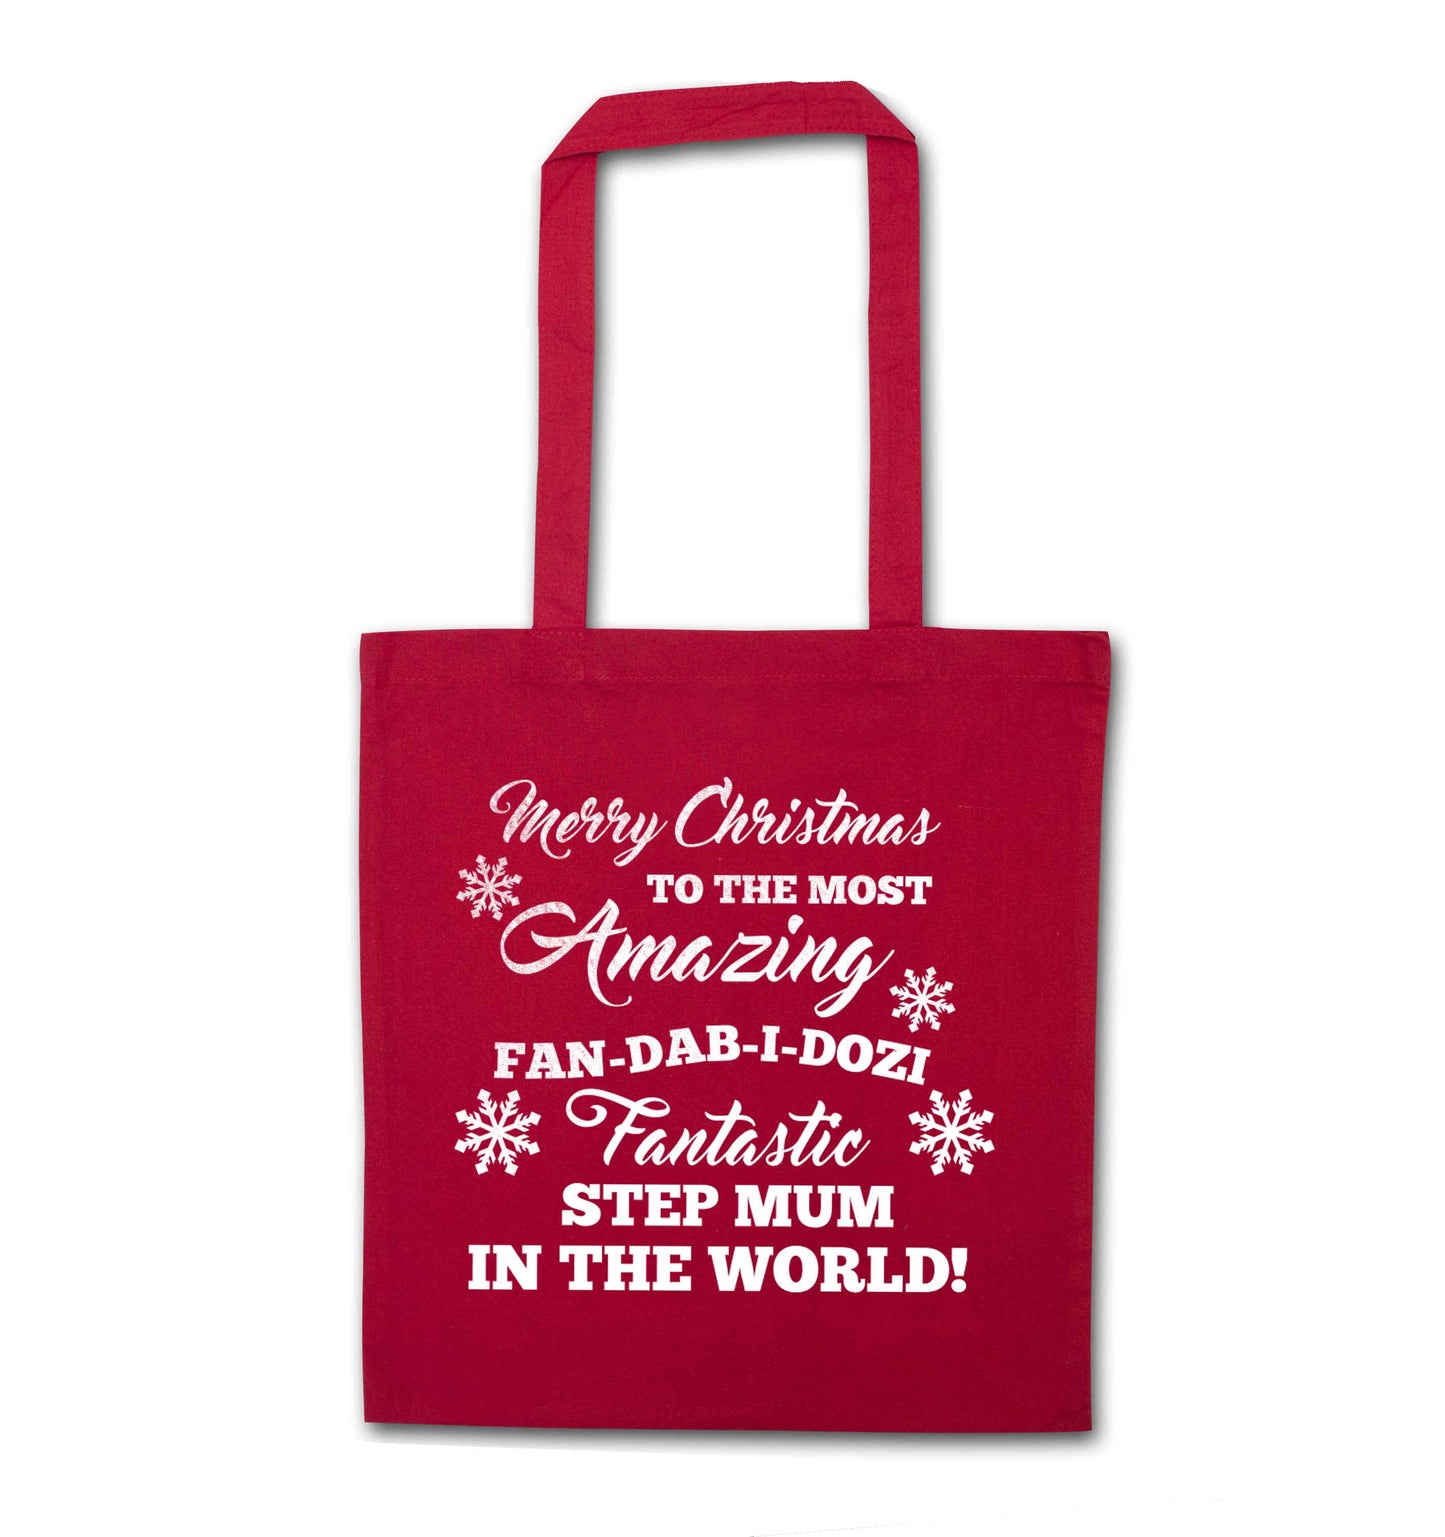 Merry Christmas to the most amazing fan-dab-i-dozi fantasic Step Mum in the world red tote bag